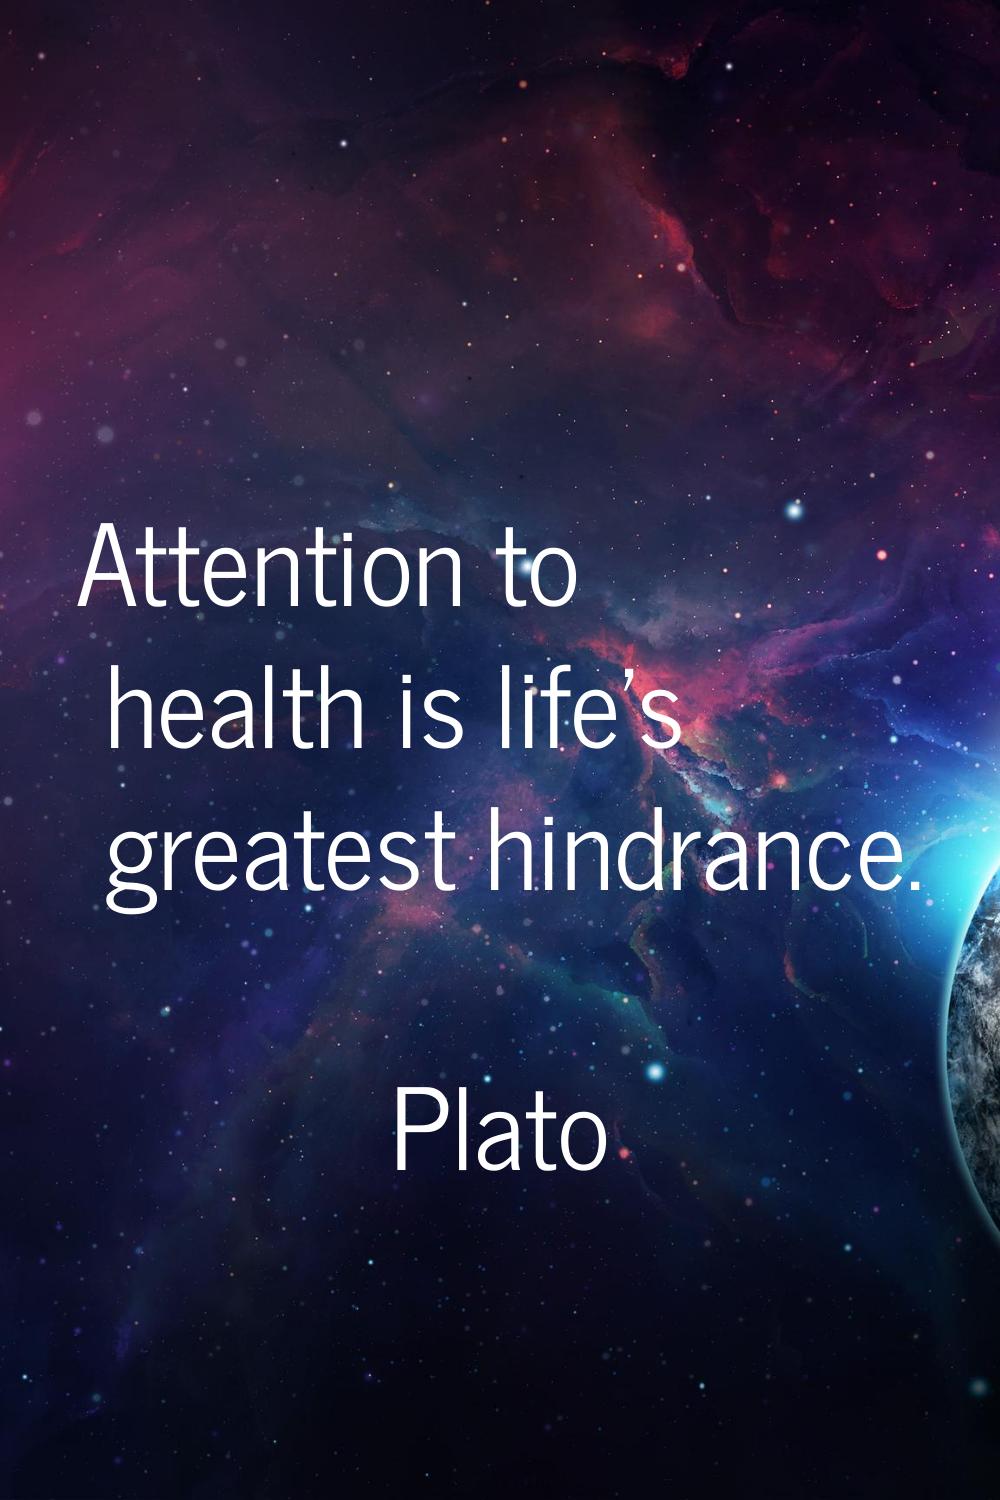 Attention to health is life's greatest hindrance.